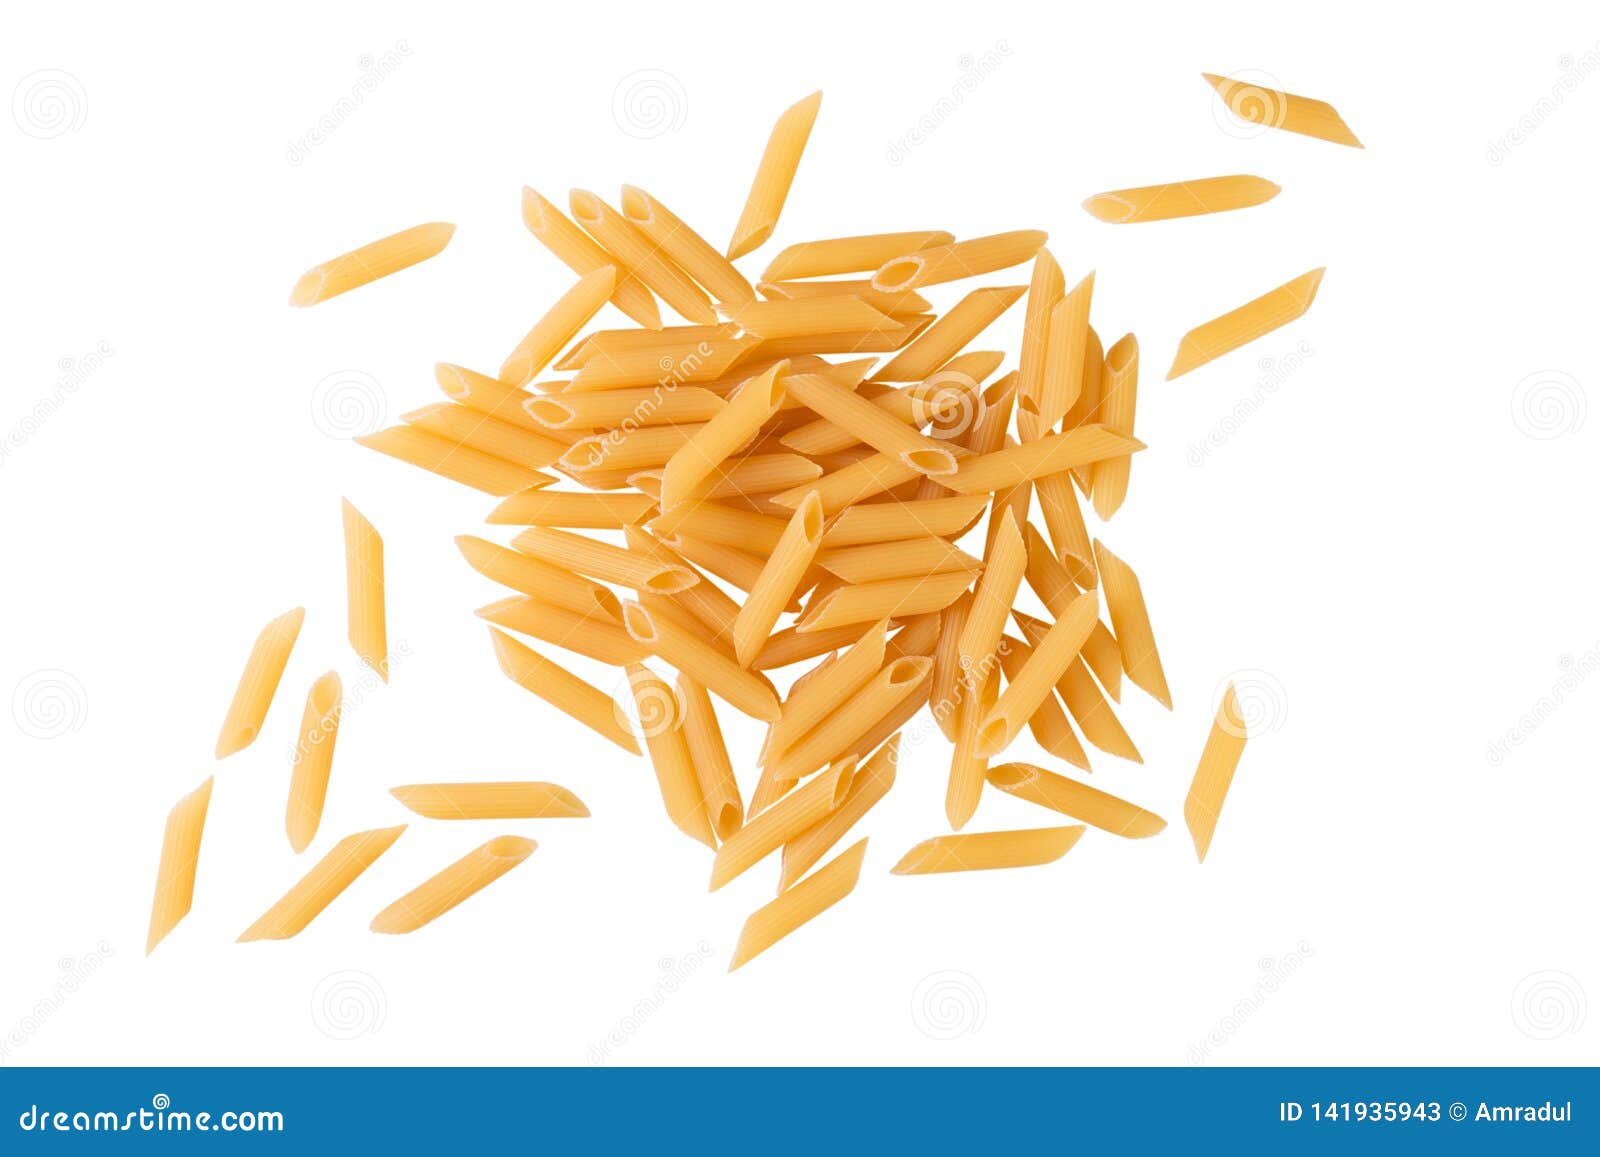 Download Pennoni. Heap Of Dry Whole Wheat Penne Pasta On White ...